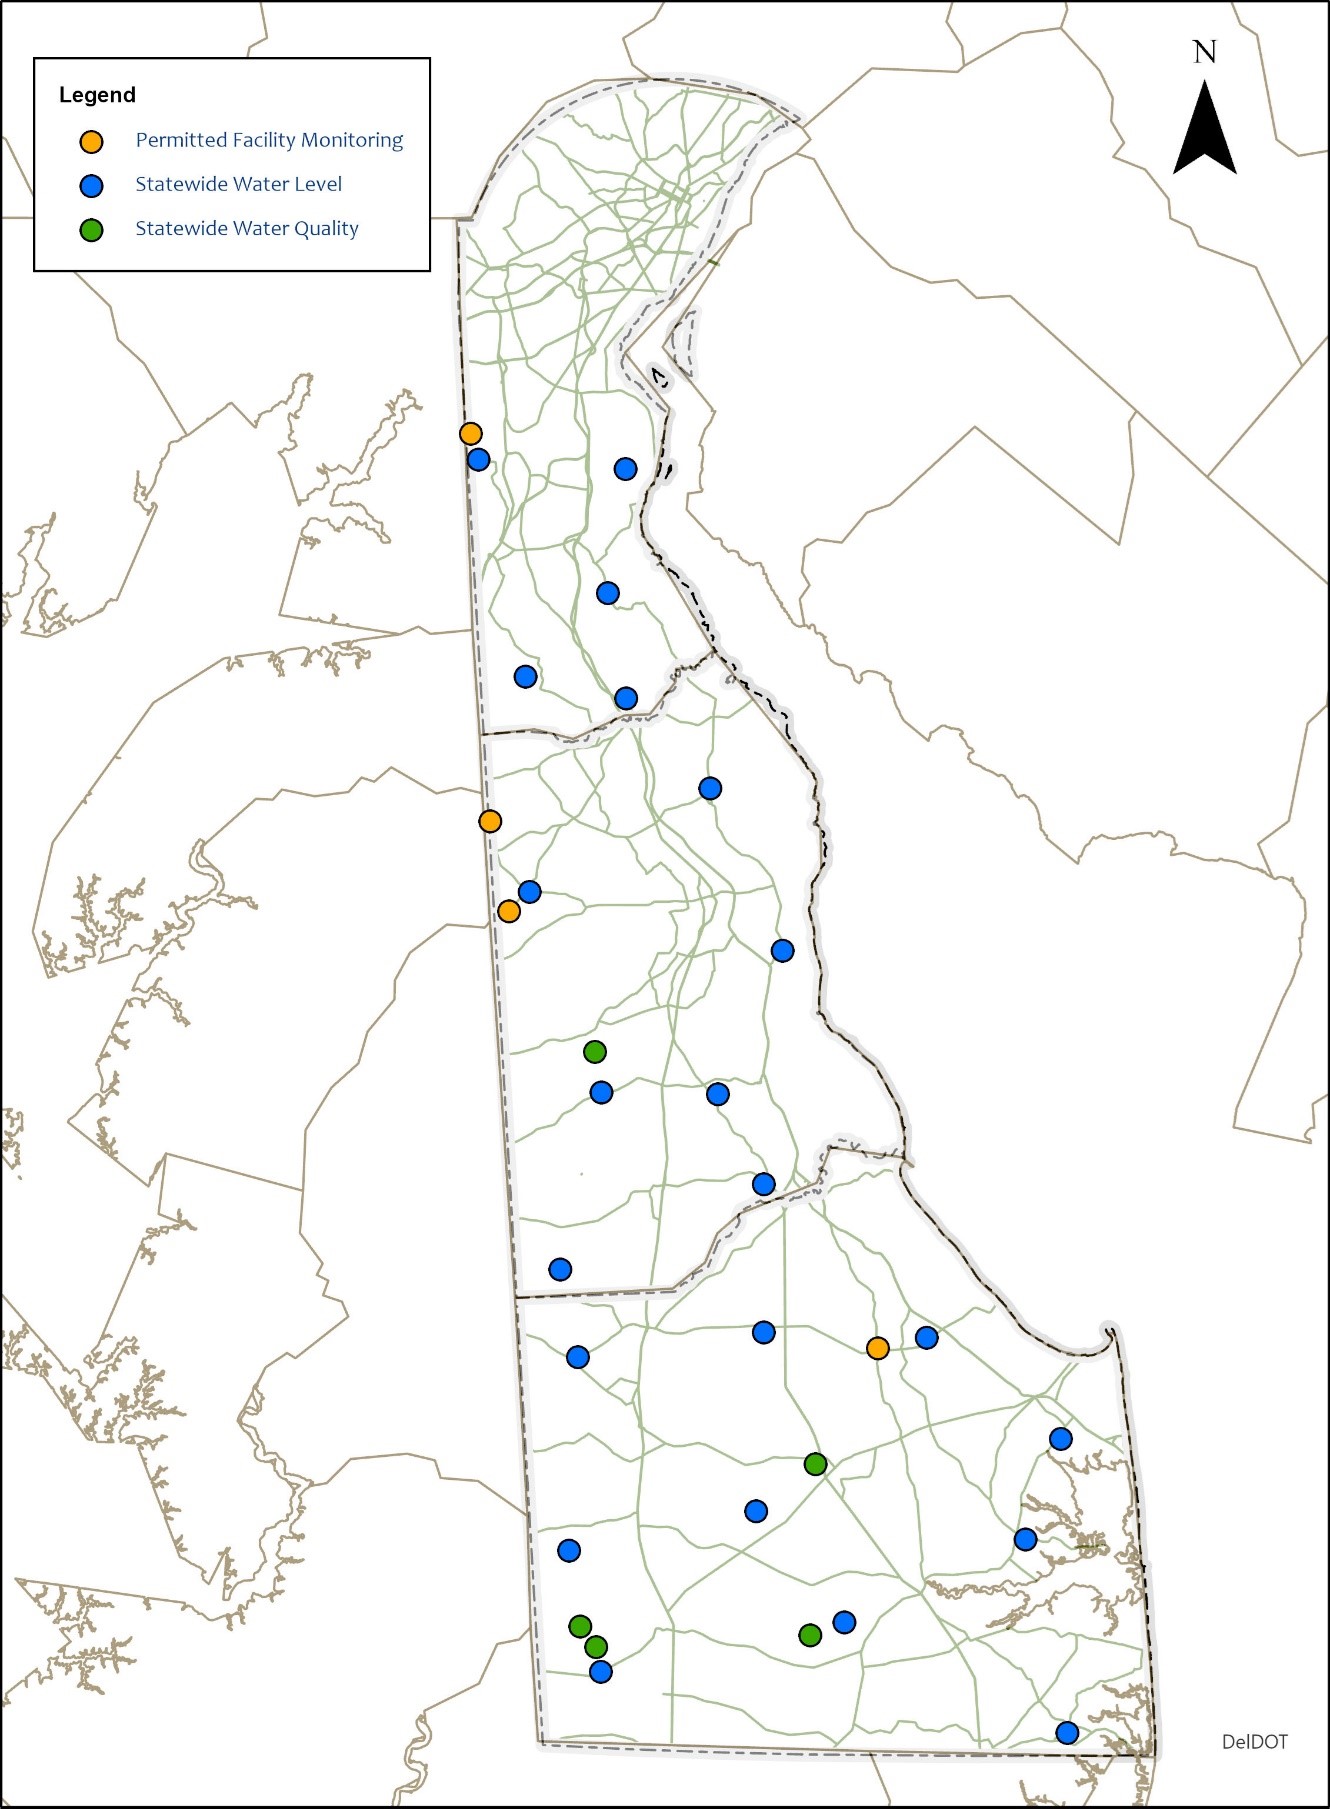 Map of the state of Delaware showing the locations of water quality monitoring wells.